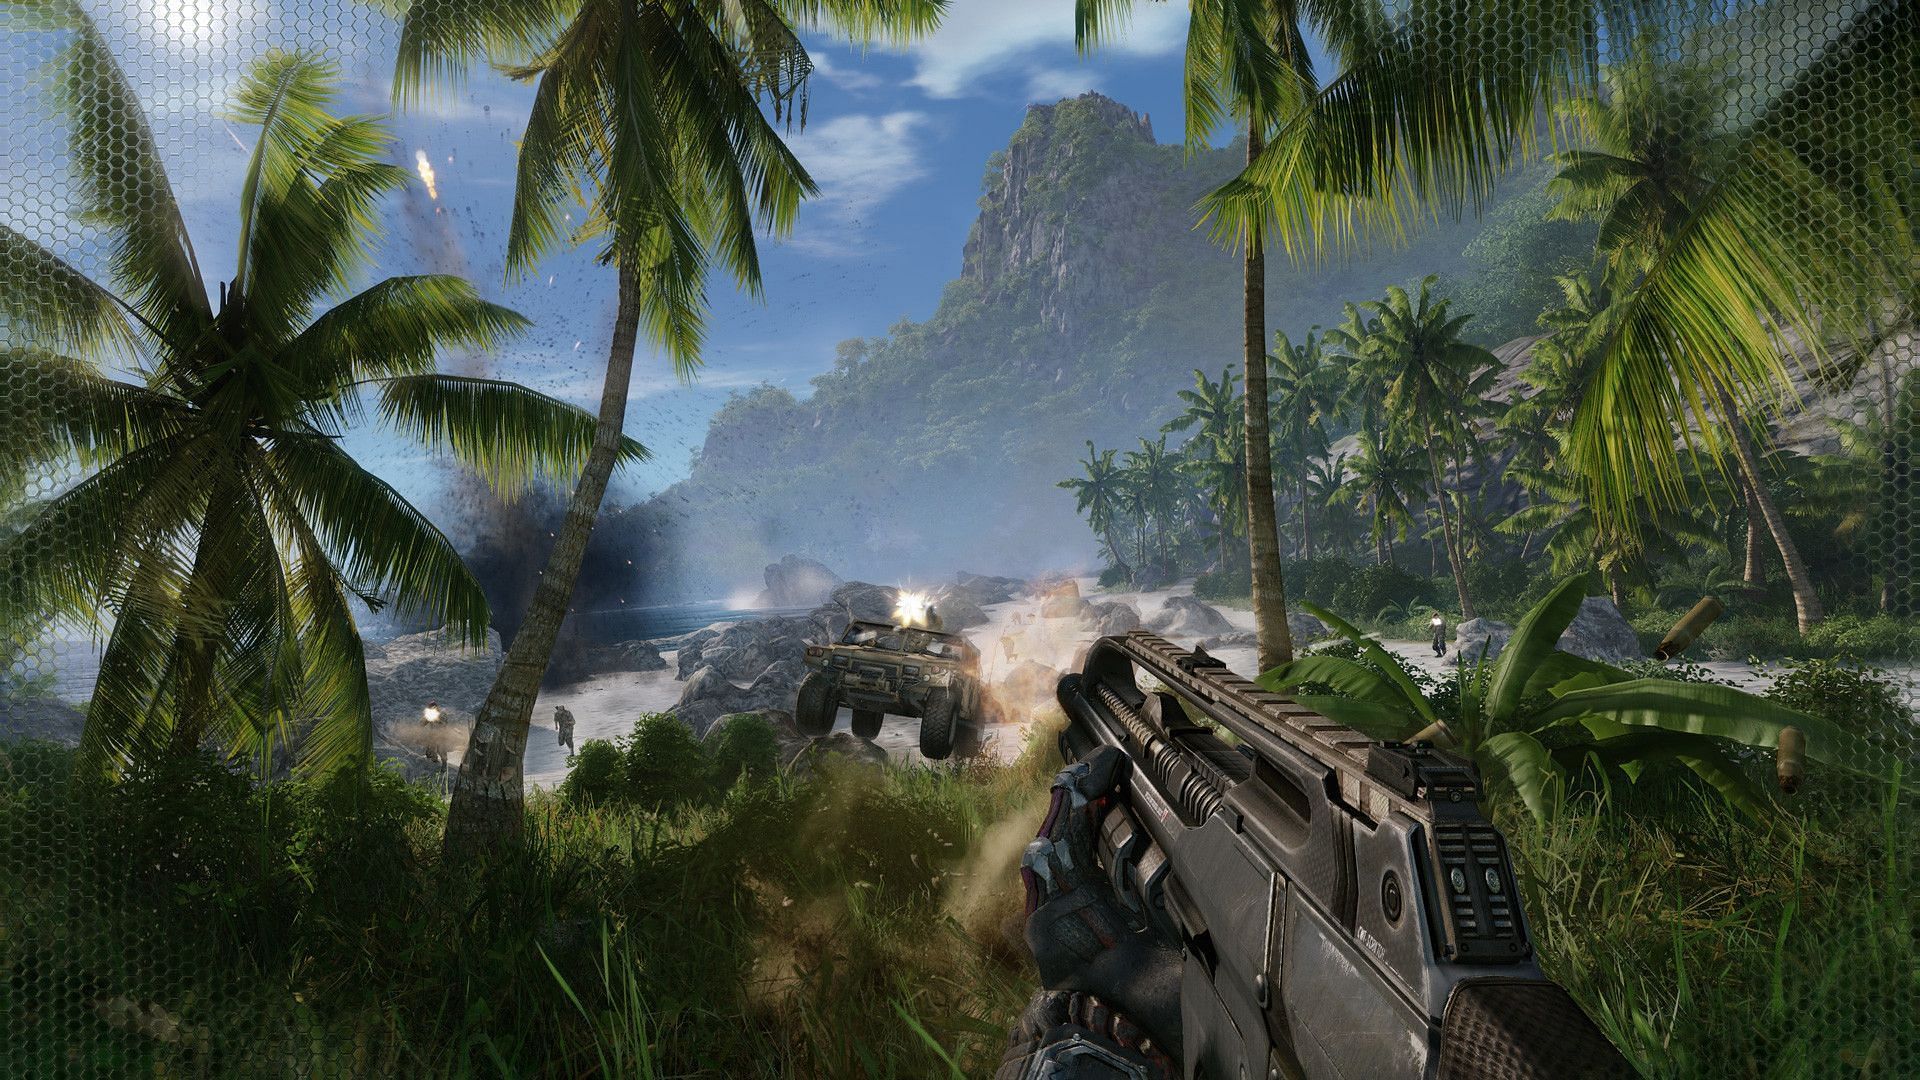 Crysis Remastered pushes modern PCs to their limits with its beautiful and lush environment (Image via Crytek)